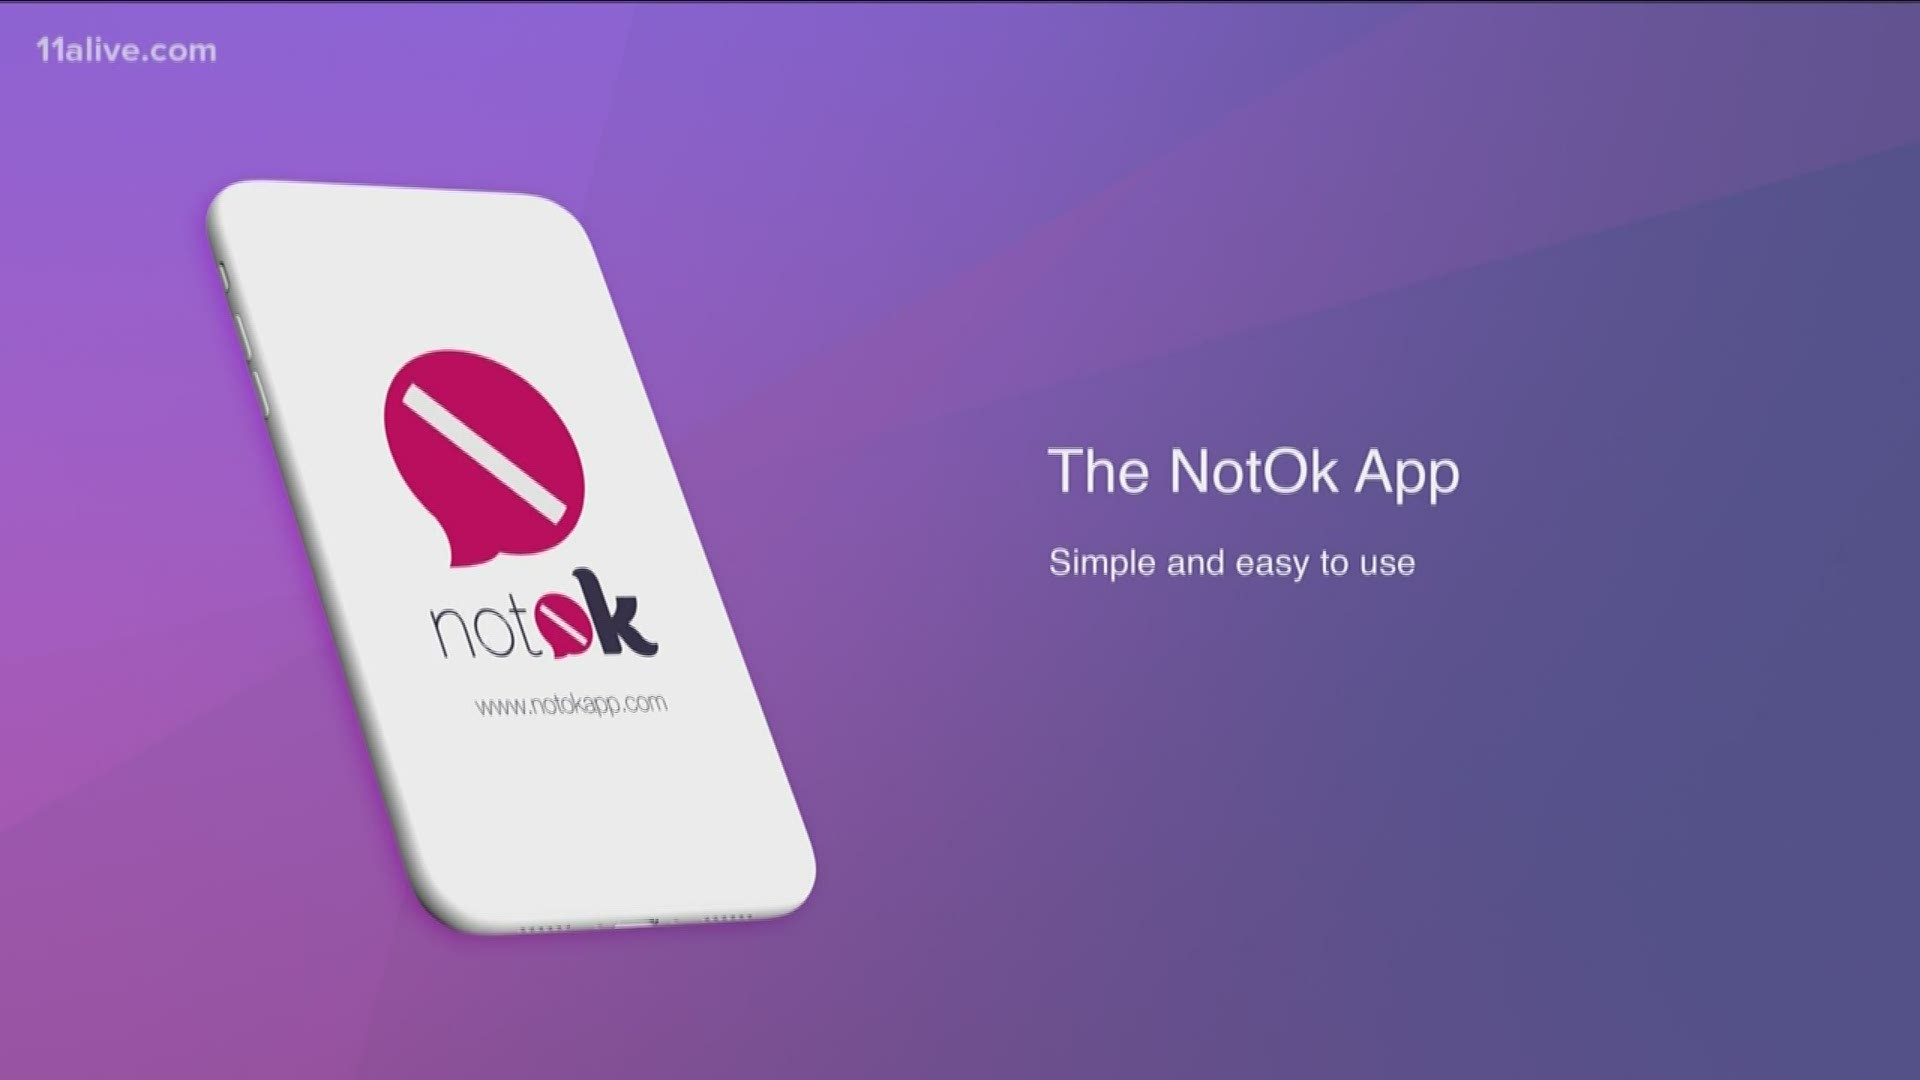 The notOK App was created by Hannah and Charlie Lucas, after Hannah attempted to take her own life.